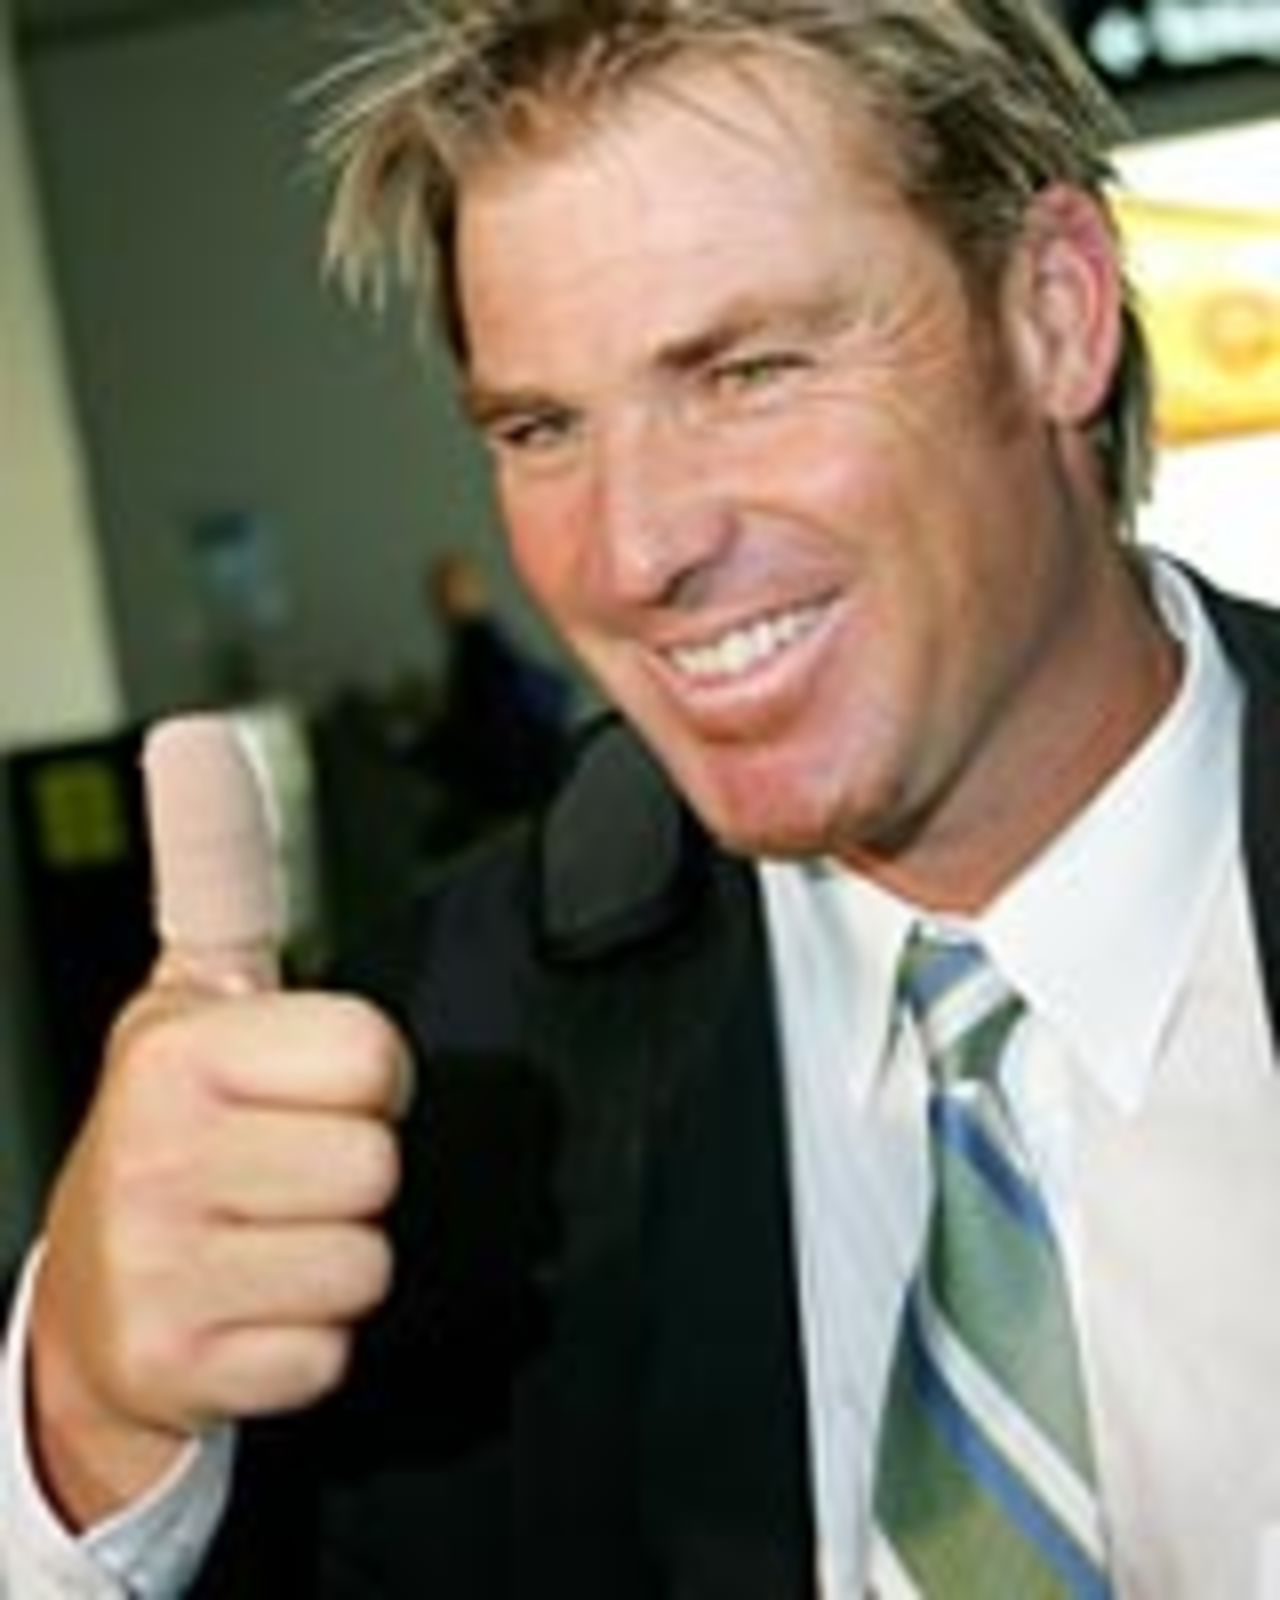 Shane Warne gives a thumbs up for the camera, November 4, 2004